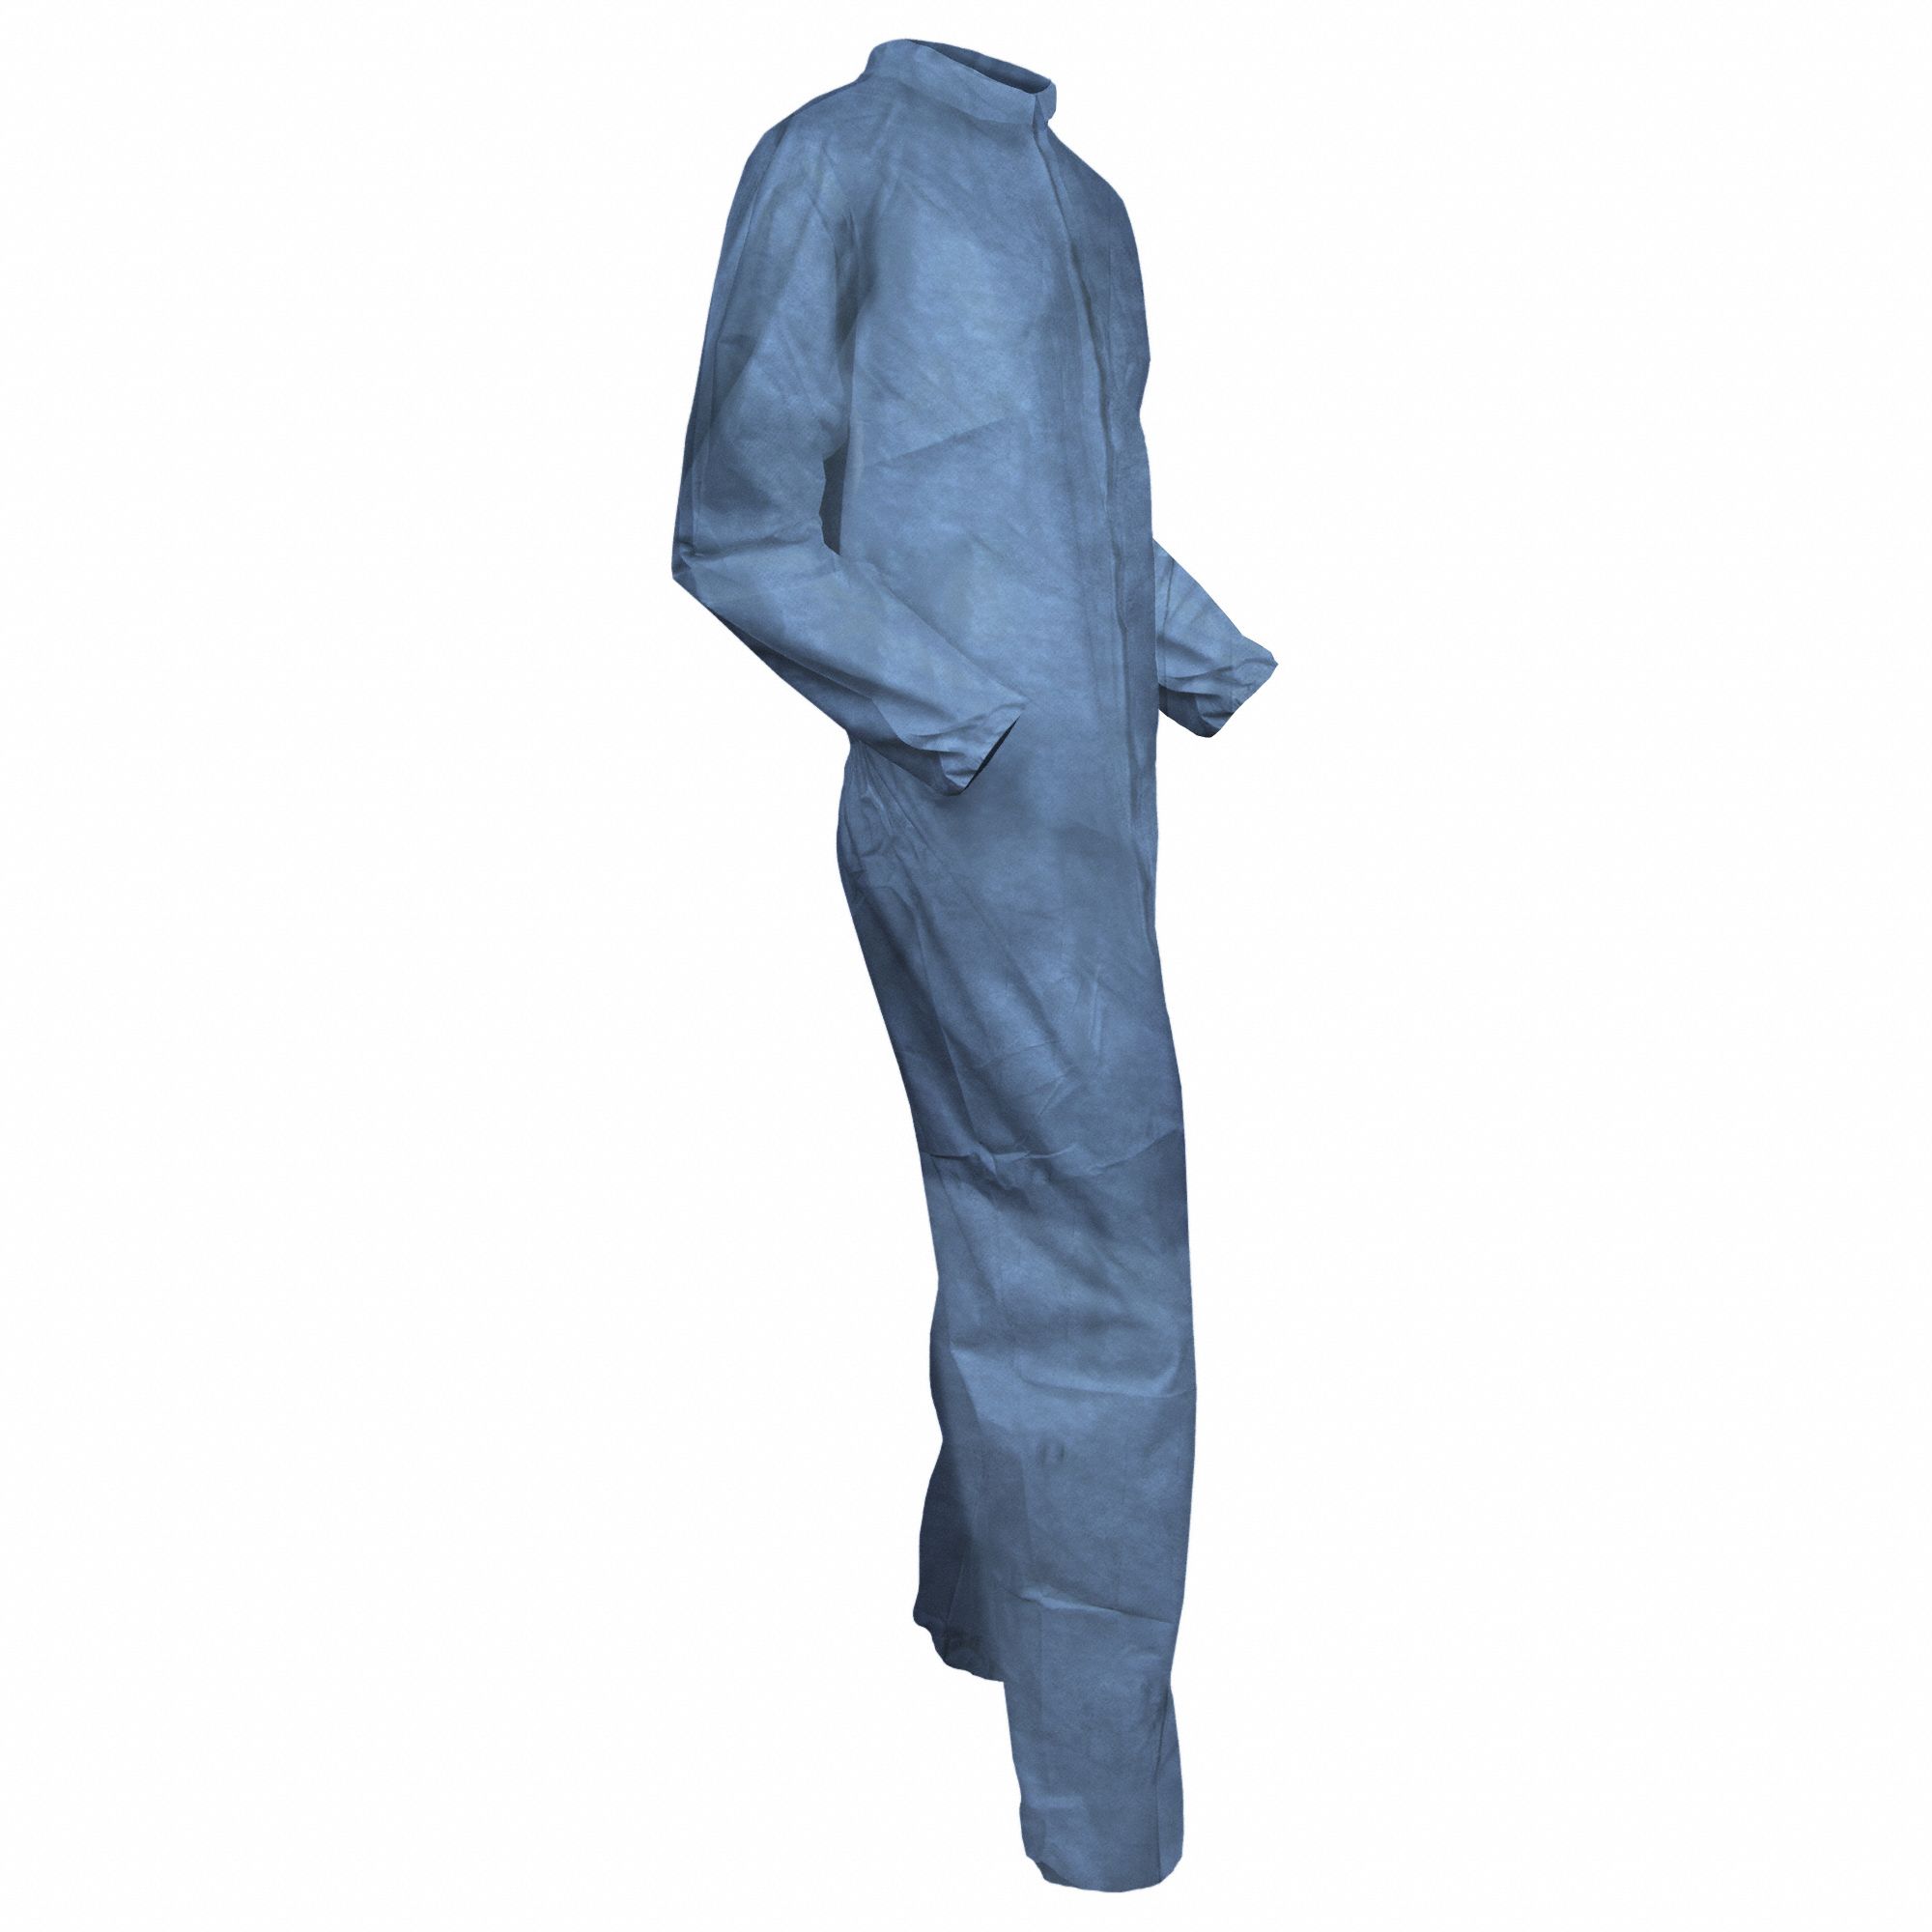 KleenGuard 45314 Flame-resistant Coverall Blue XL Pk25 for sale online